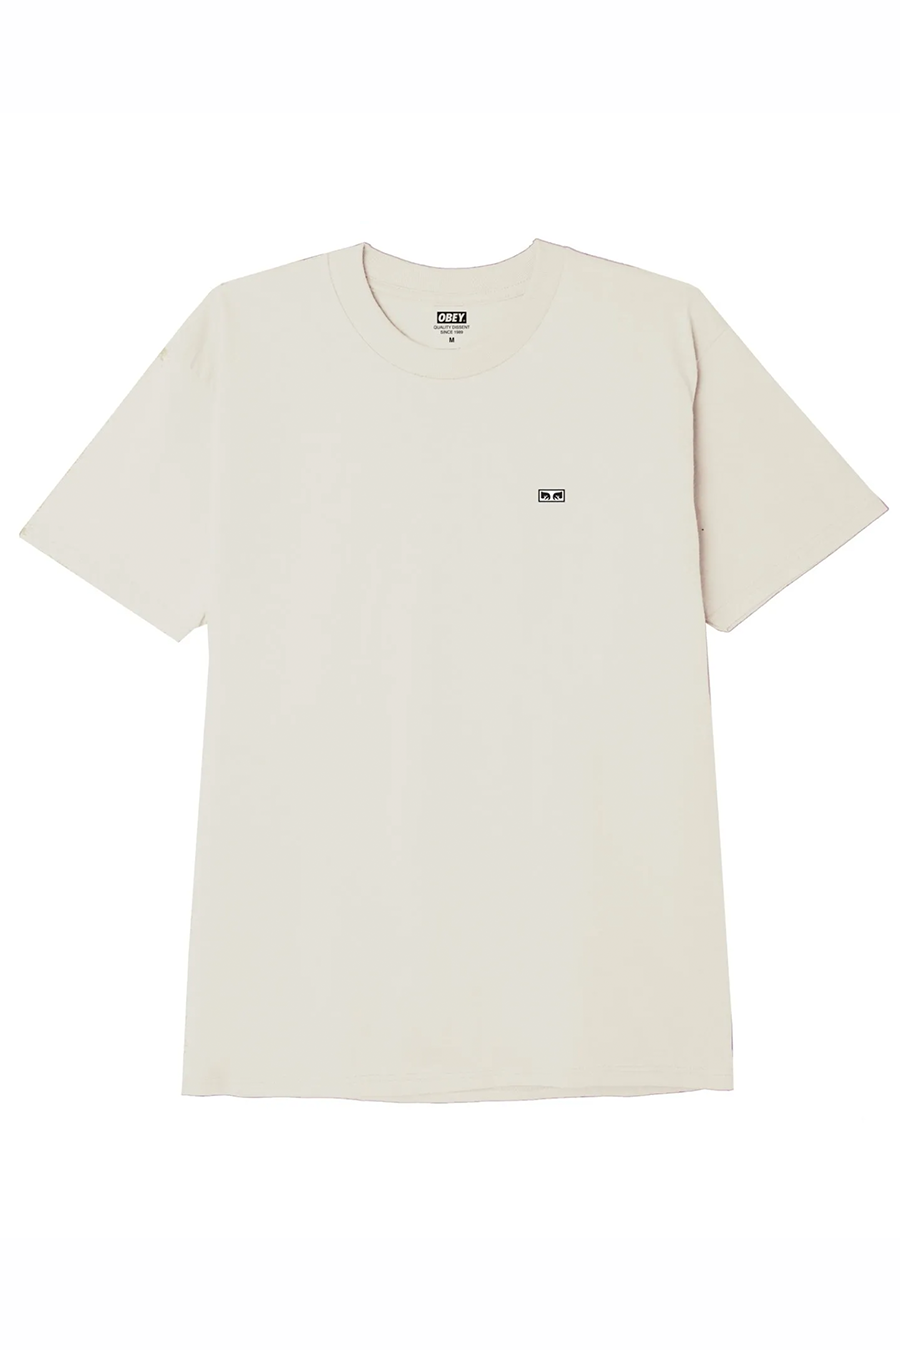 Be Kind Tee | Cream - Main Image Number 2 of 2